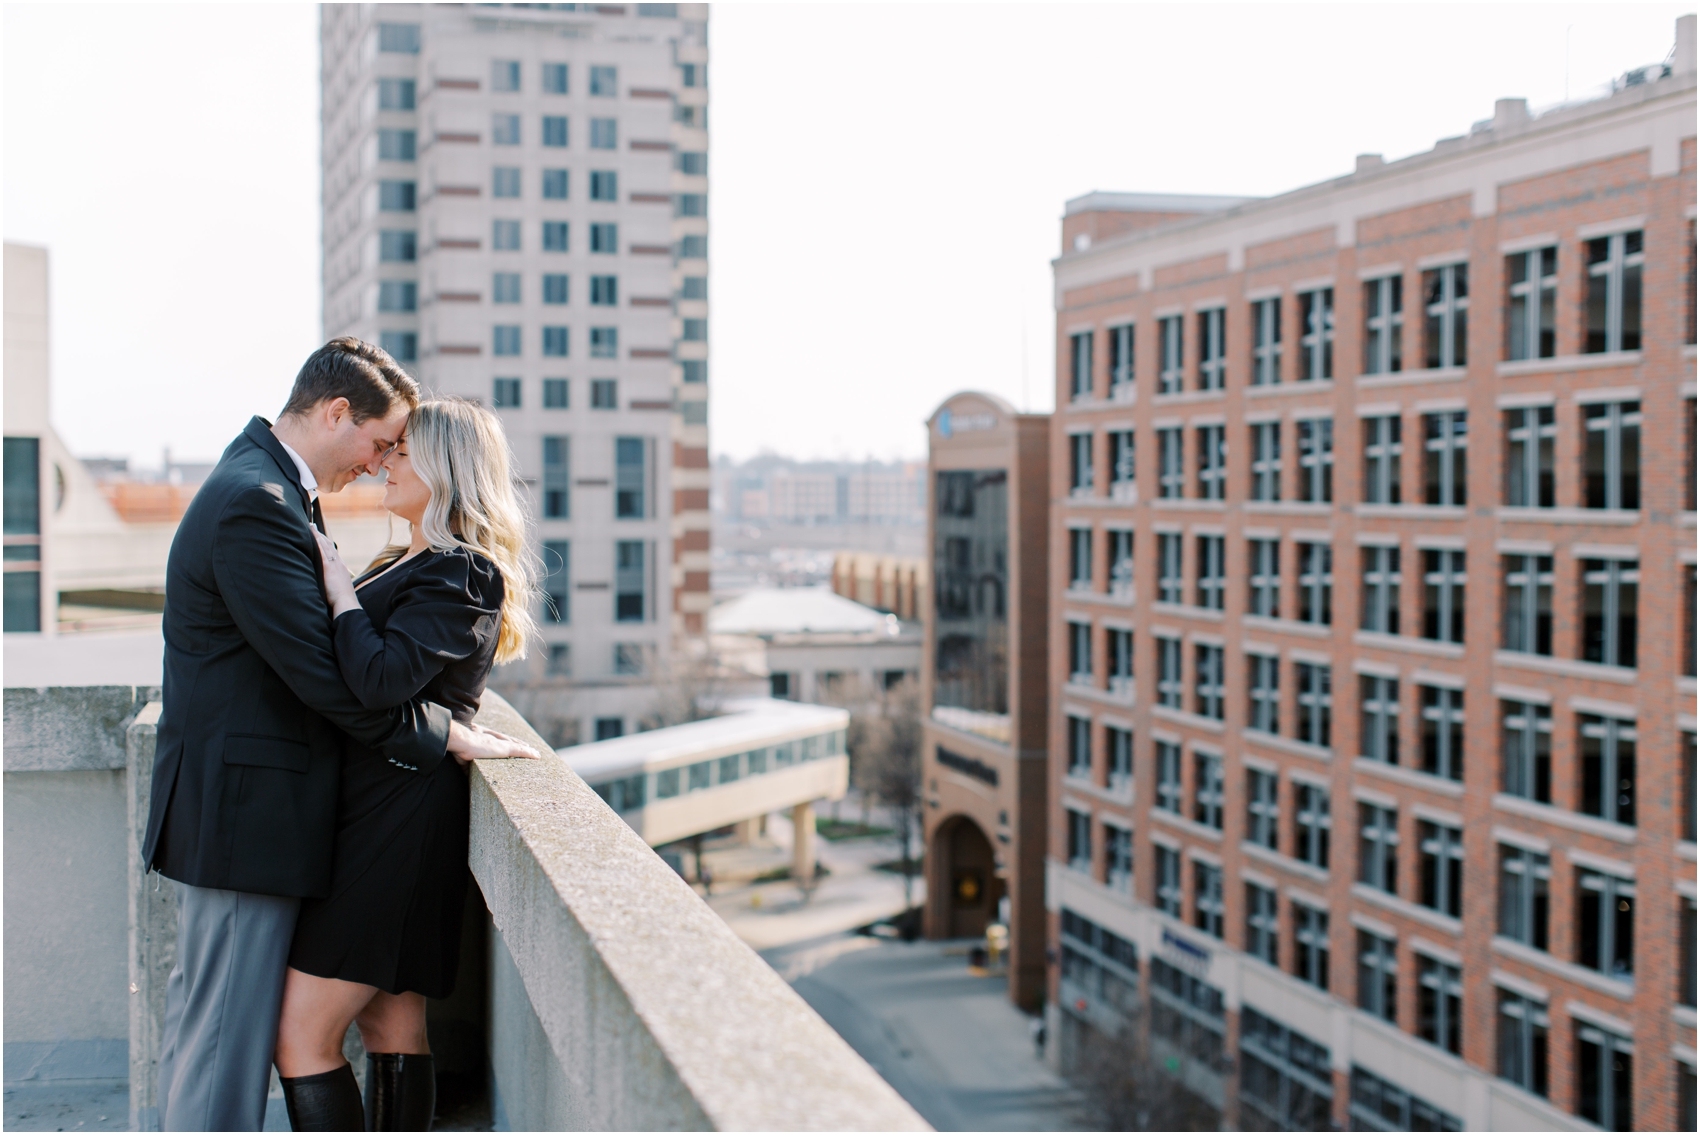 Courtney and Ben share a moment at their downtown Grand Rapids engagement session